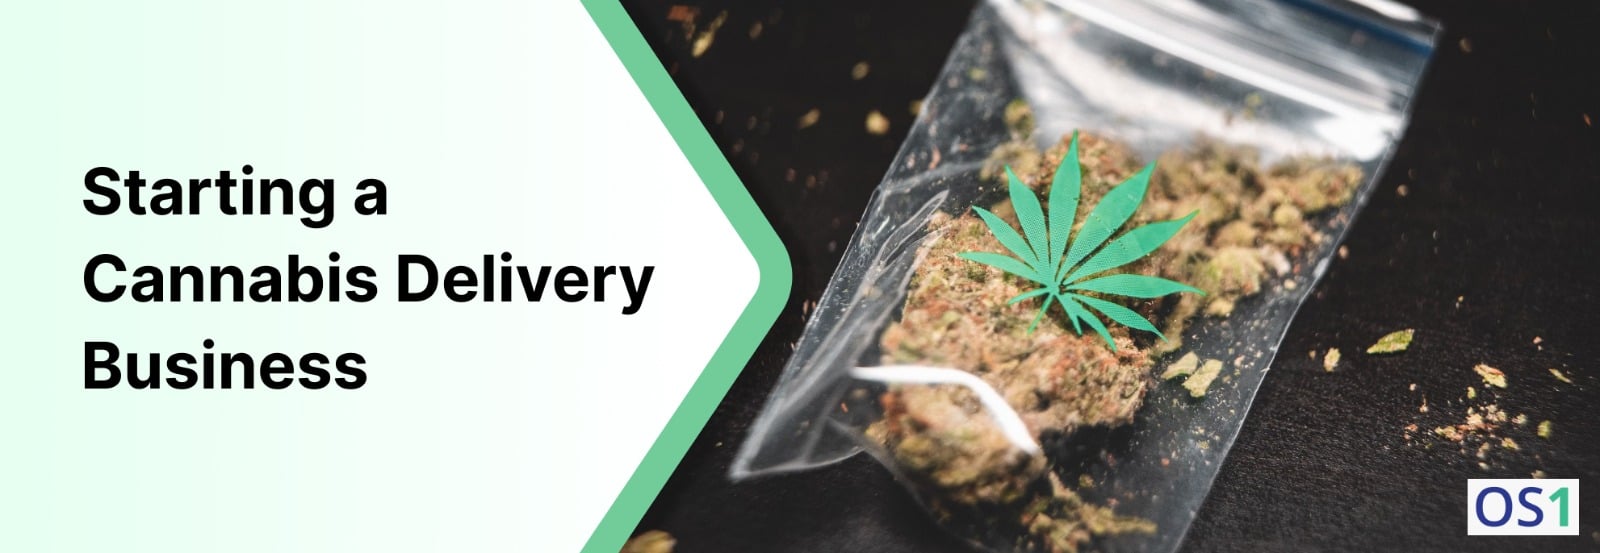 Cannabis Delivery Services